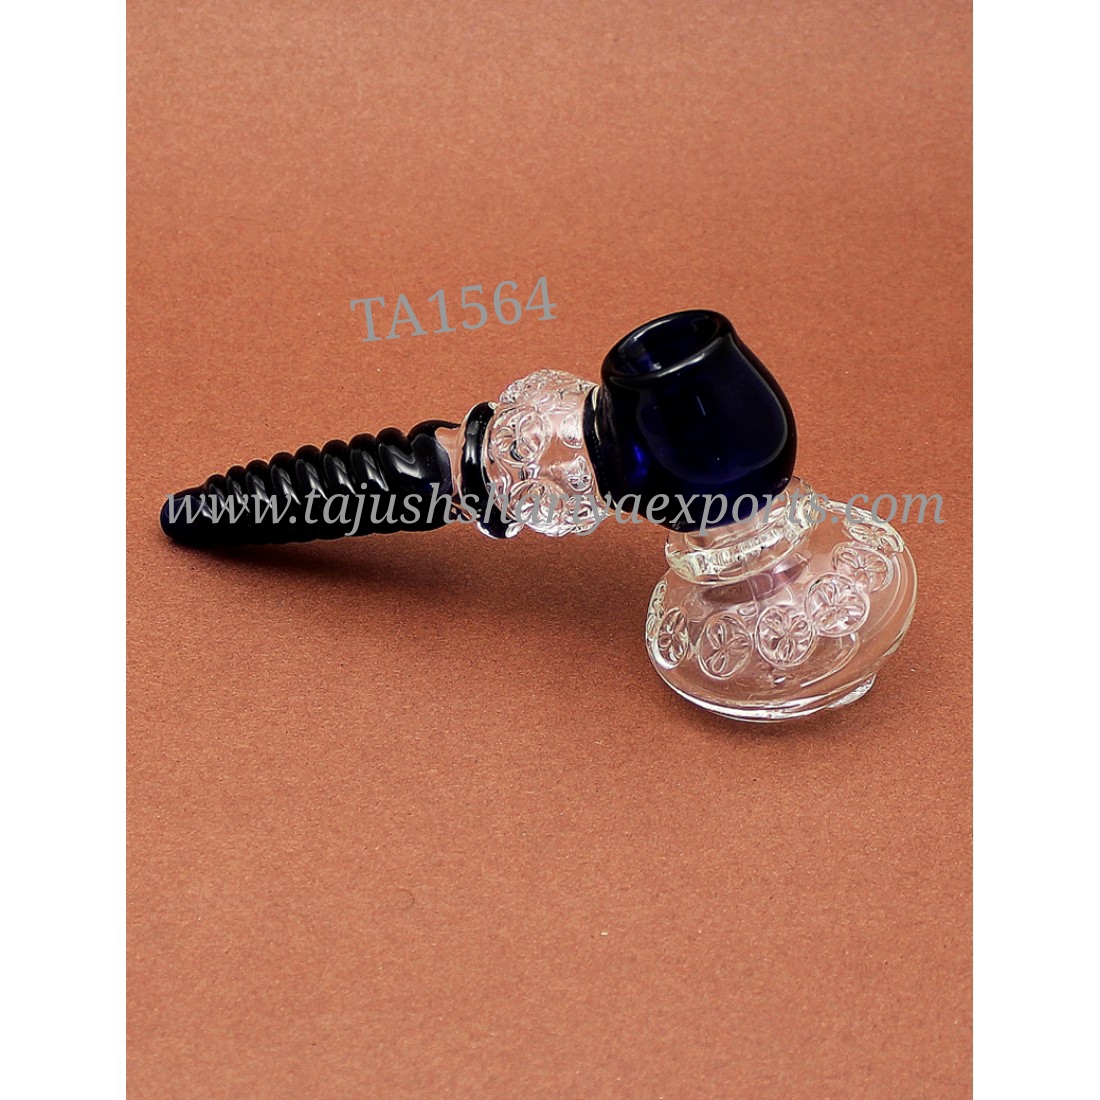 Glass Hammer Pipes Size 5